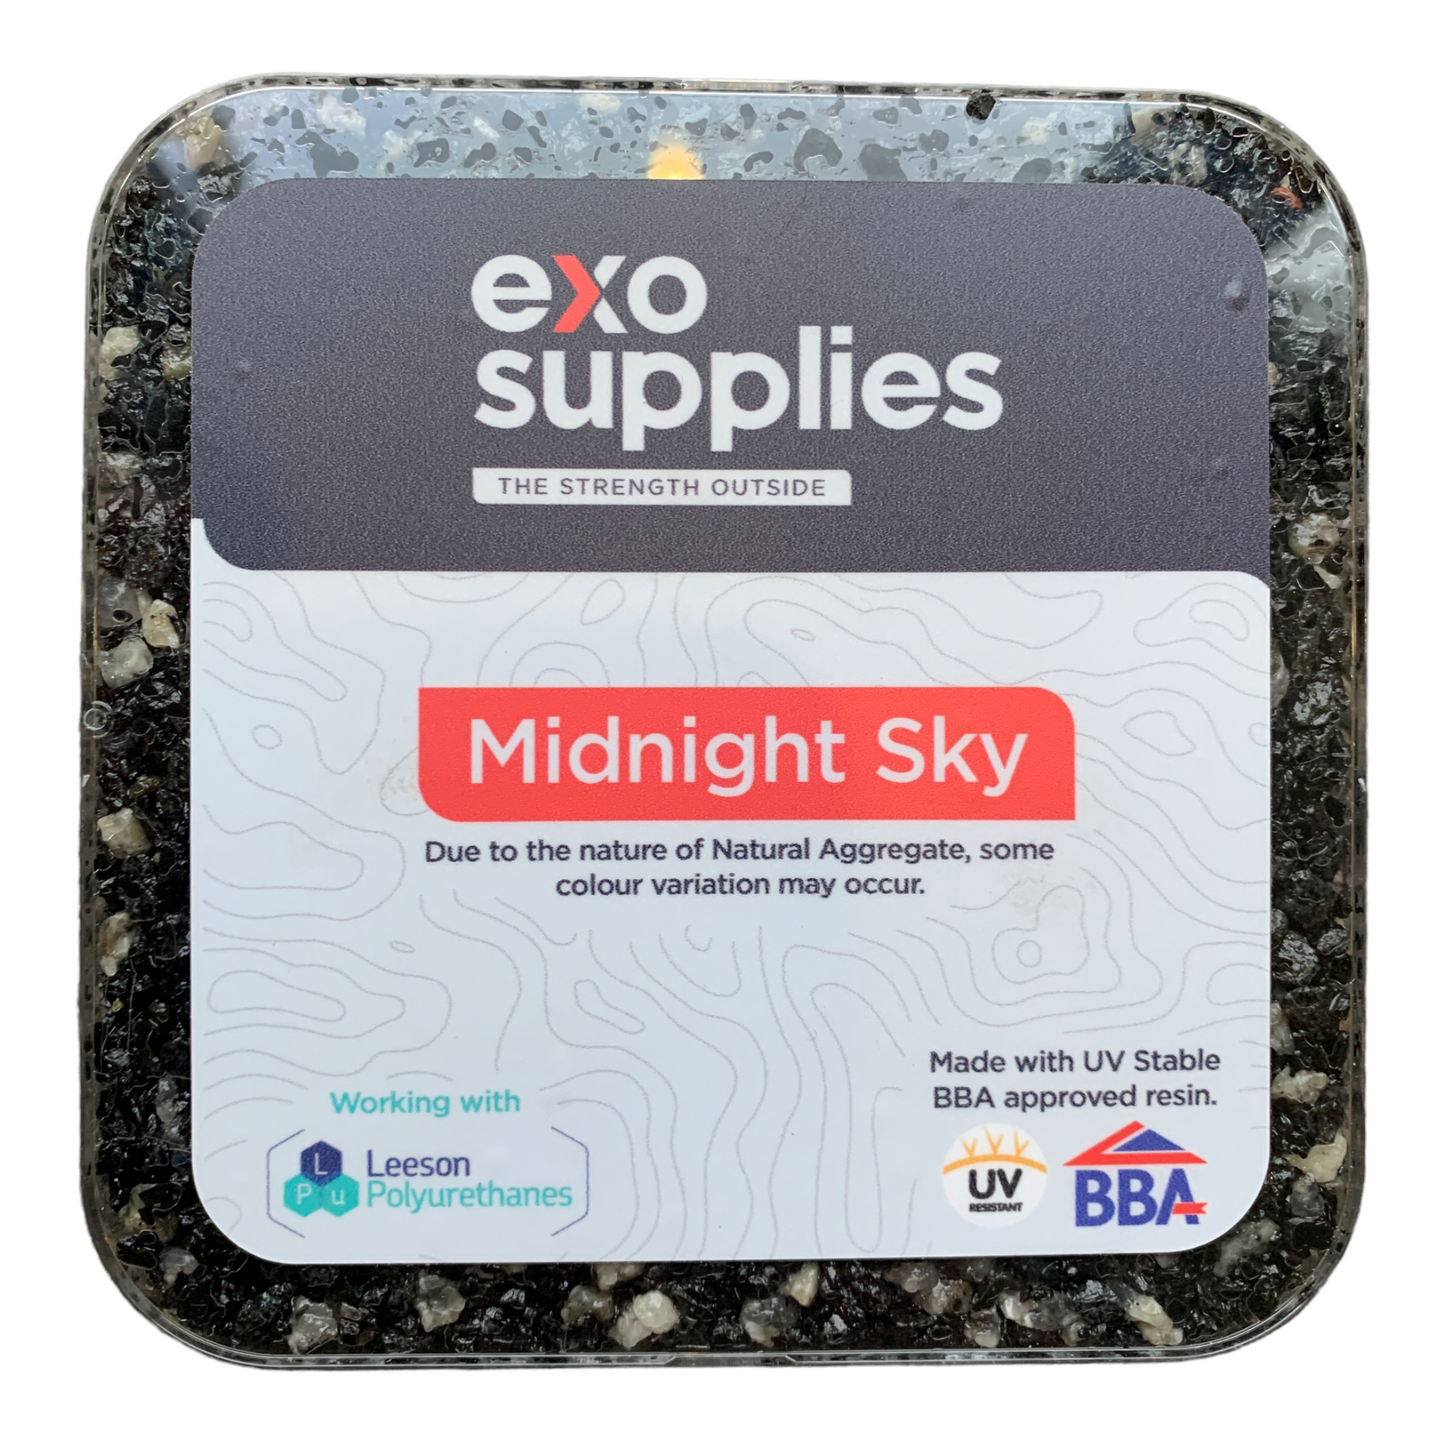 Exo Midnight Sky with BBA 7.5kg UV stable Resin